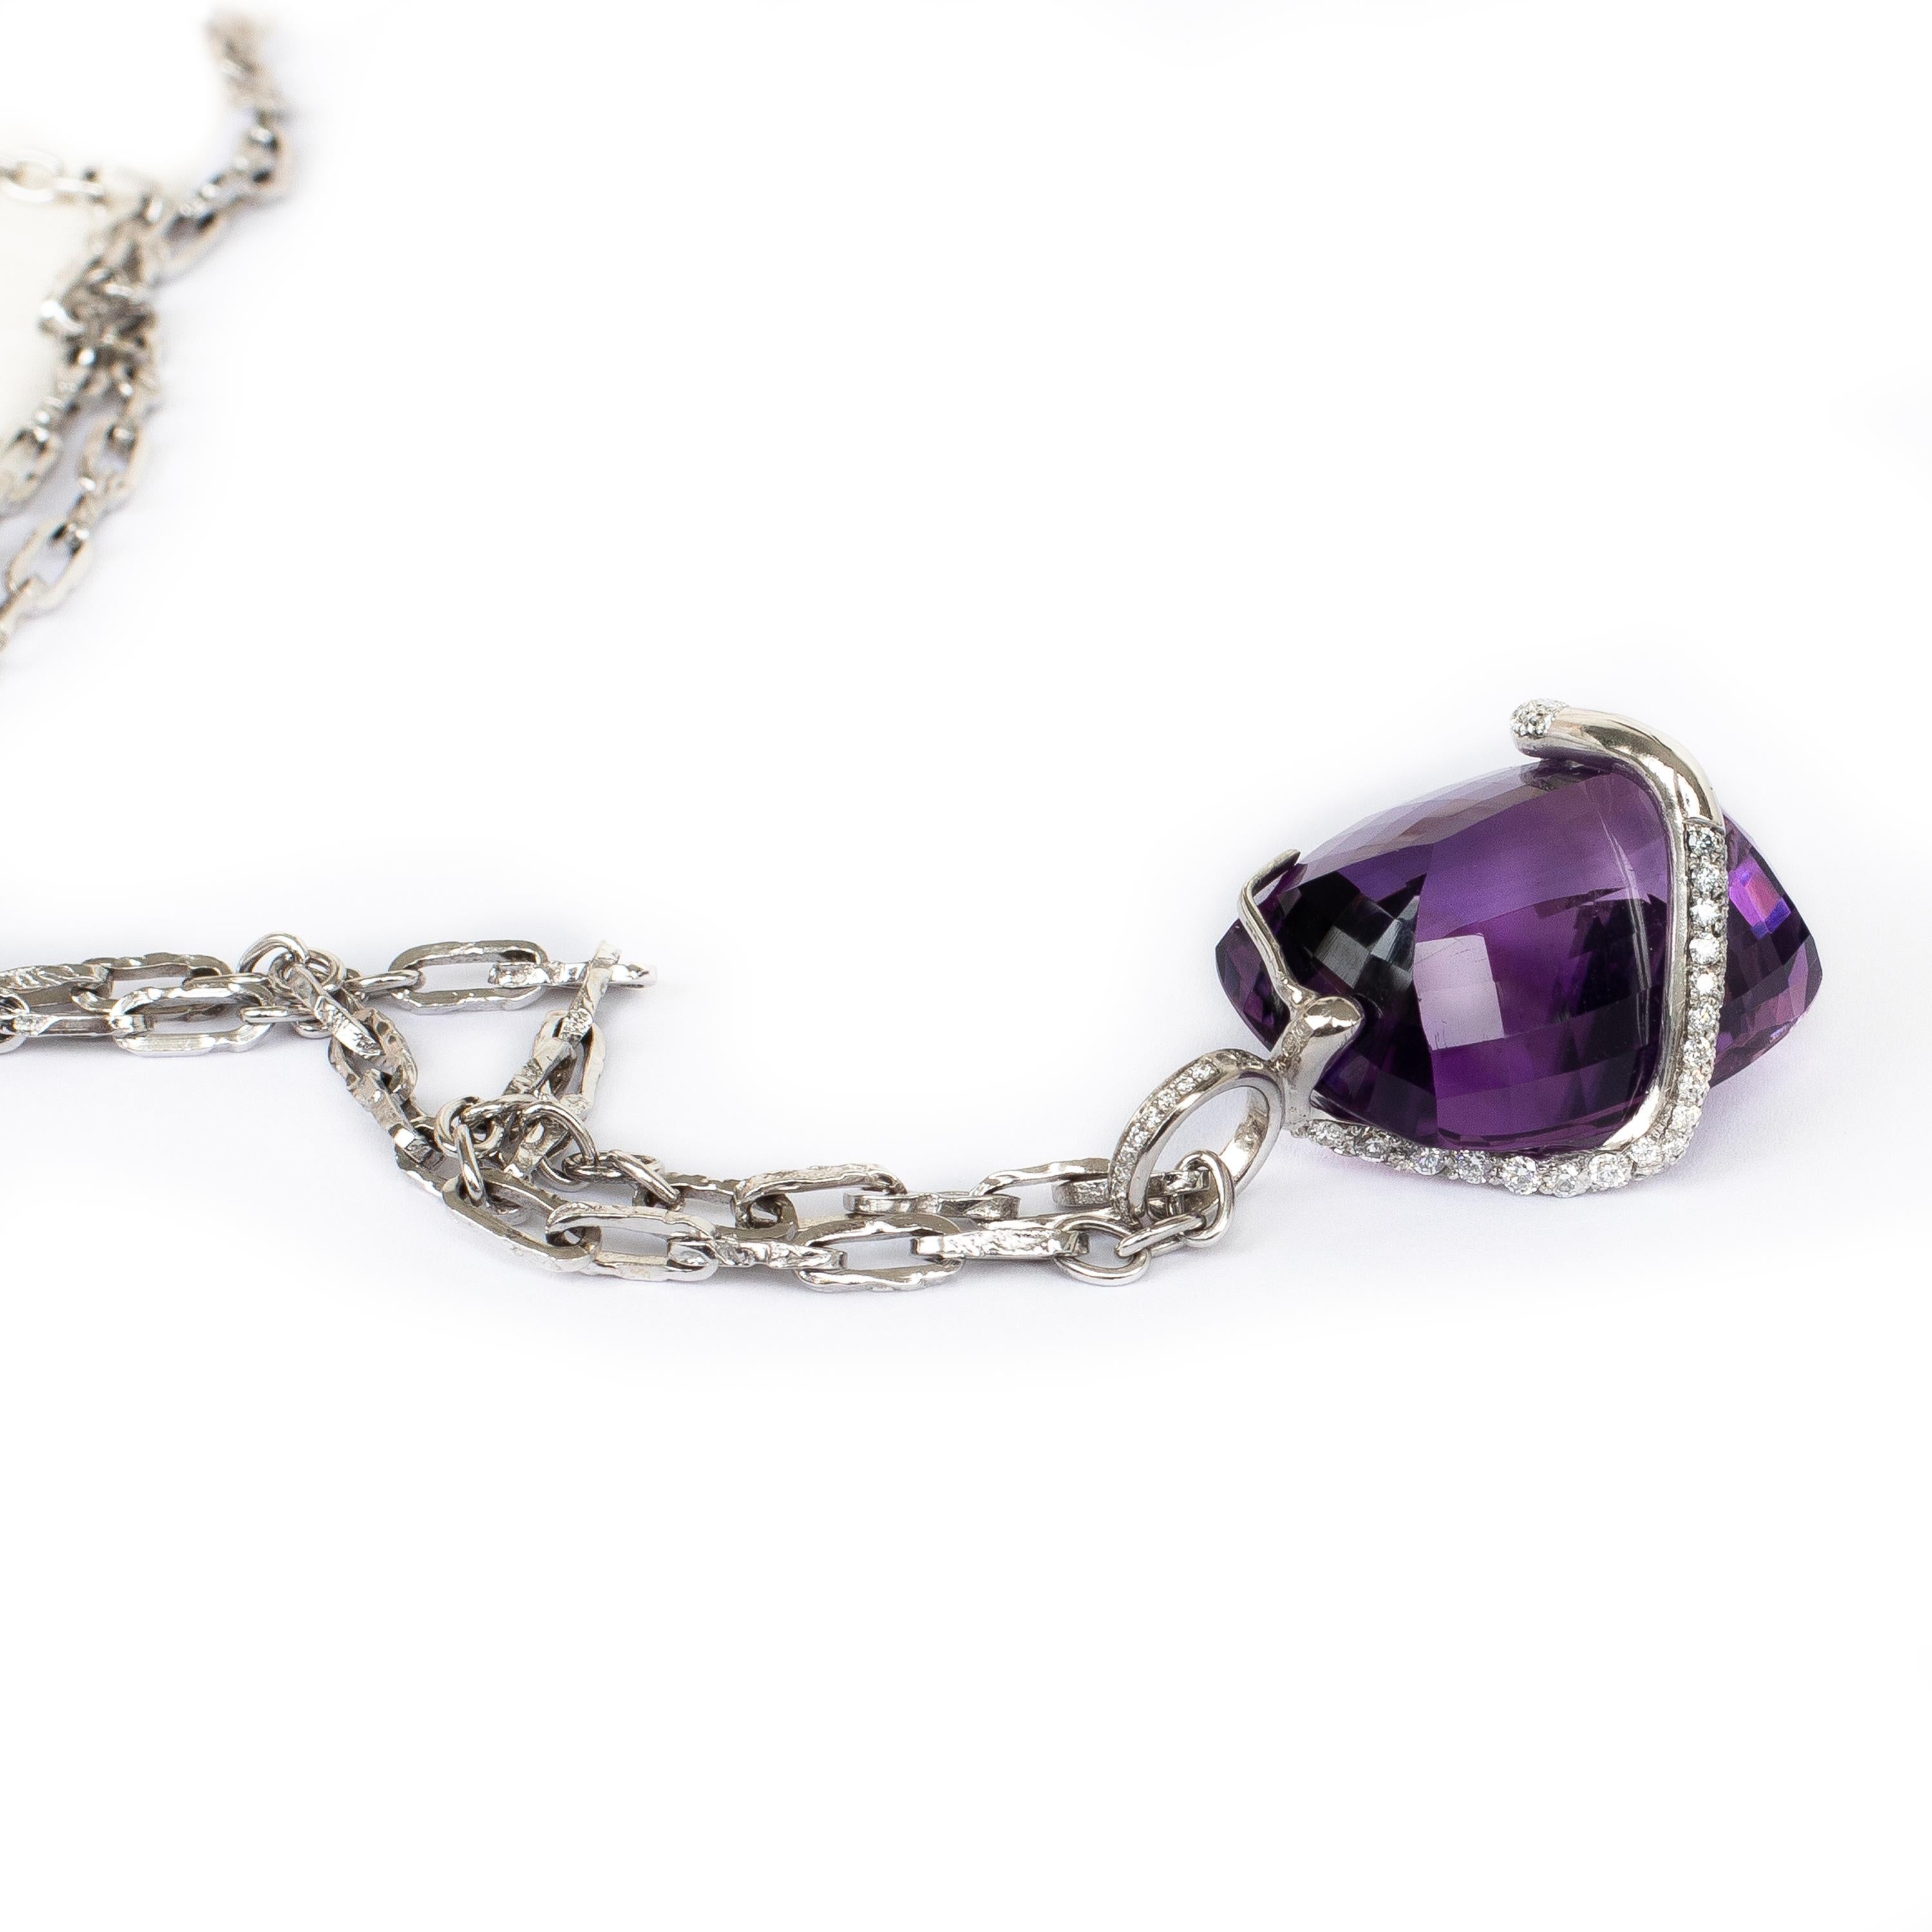 Contemporary Rosior 79 Carat Cushion Cut Amethyst and Diamond Long Pendant Necklace